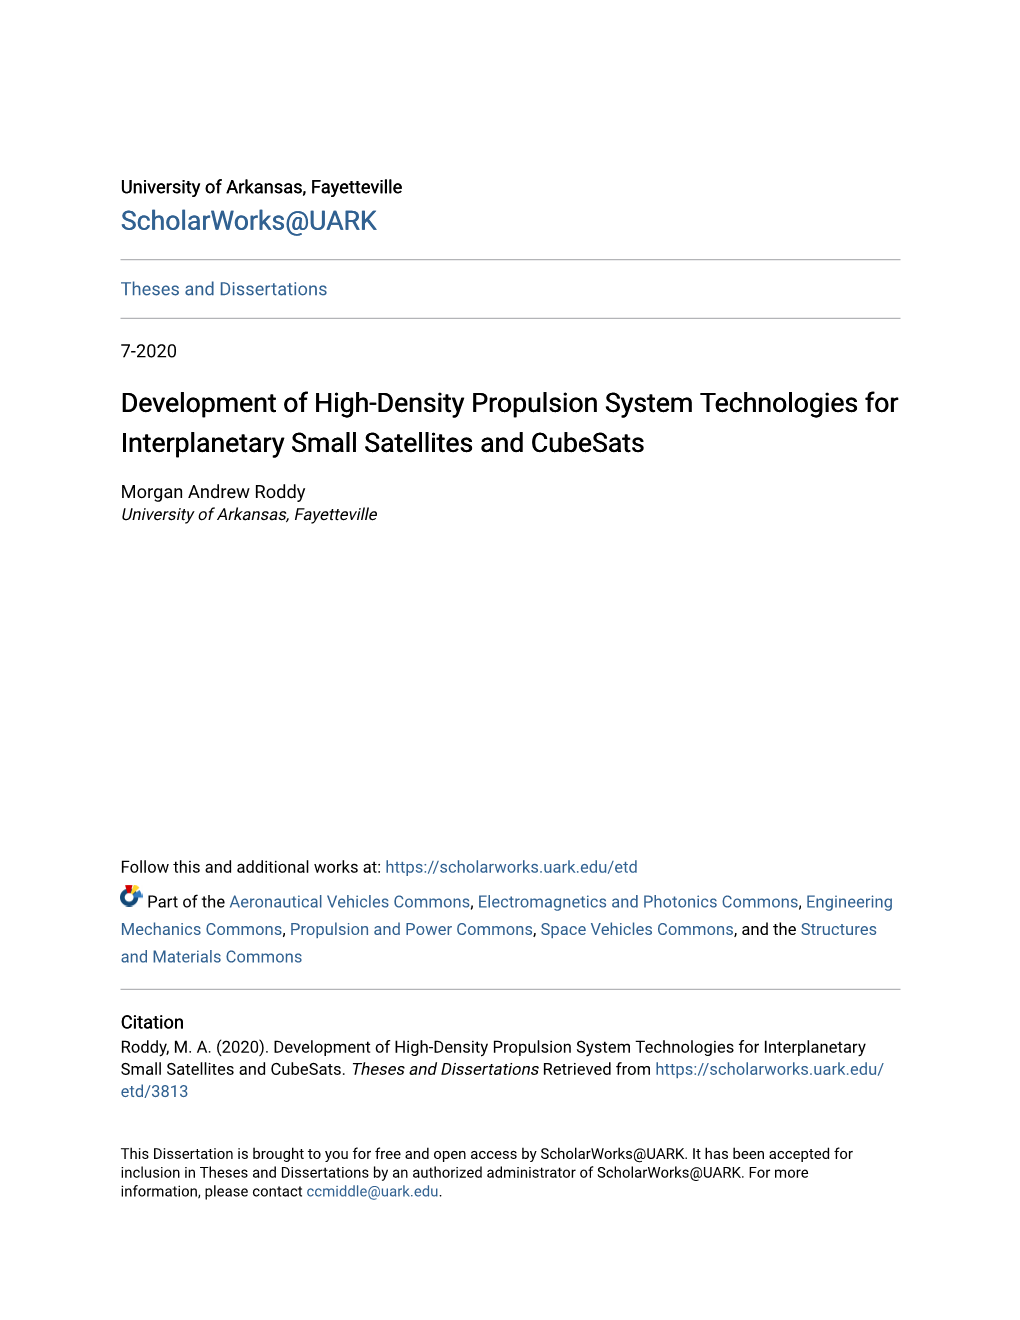 Development of High-Density Propulsion System Technologies for Interplanetary Small Satellites and Cubesats